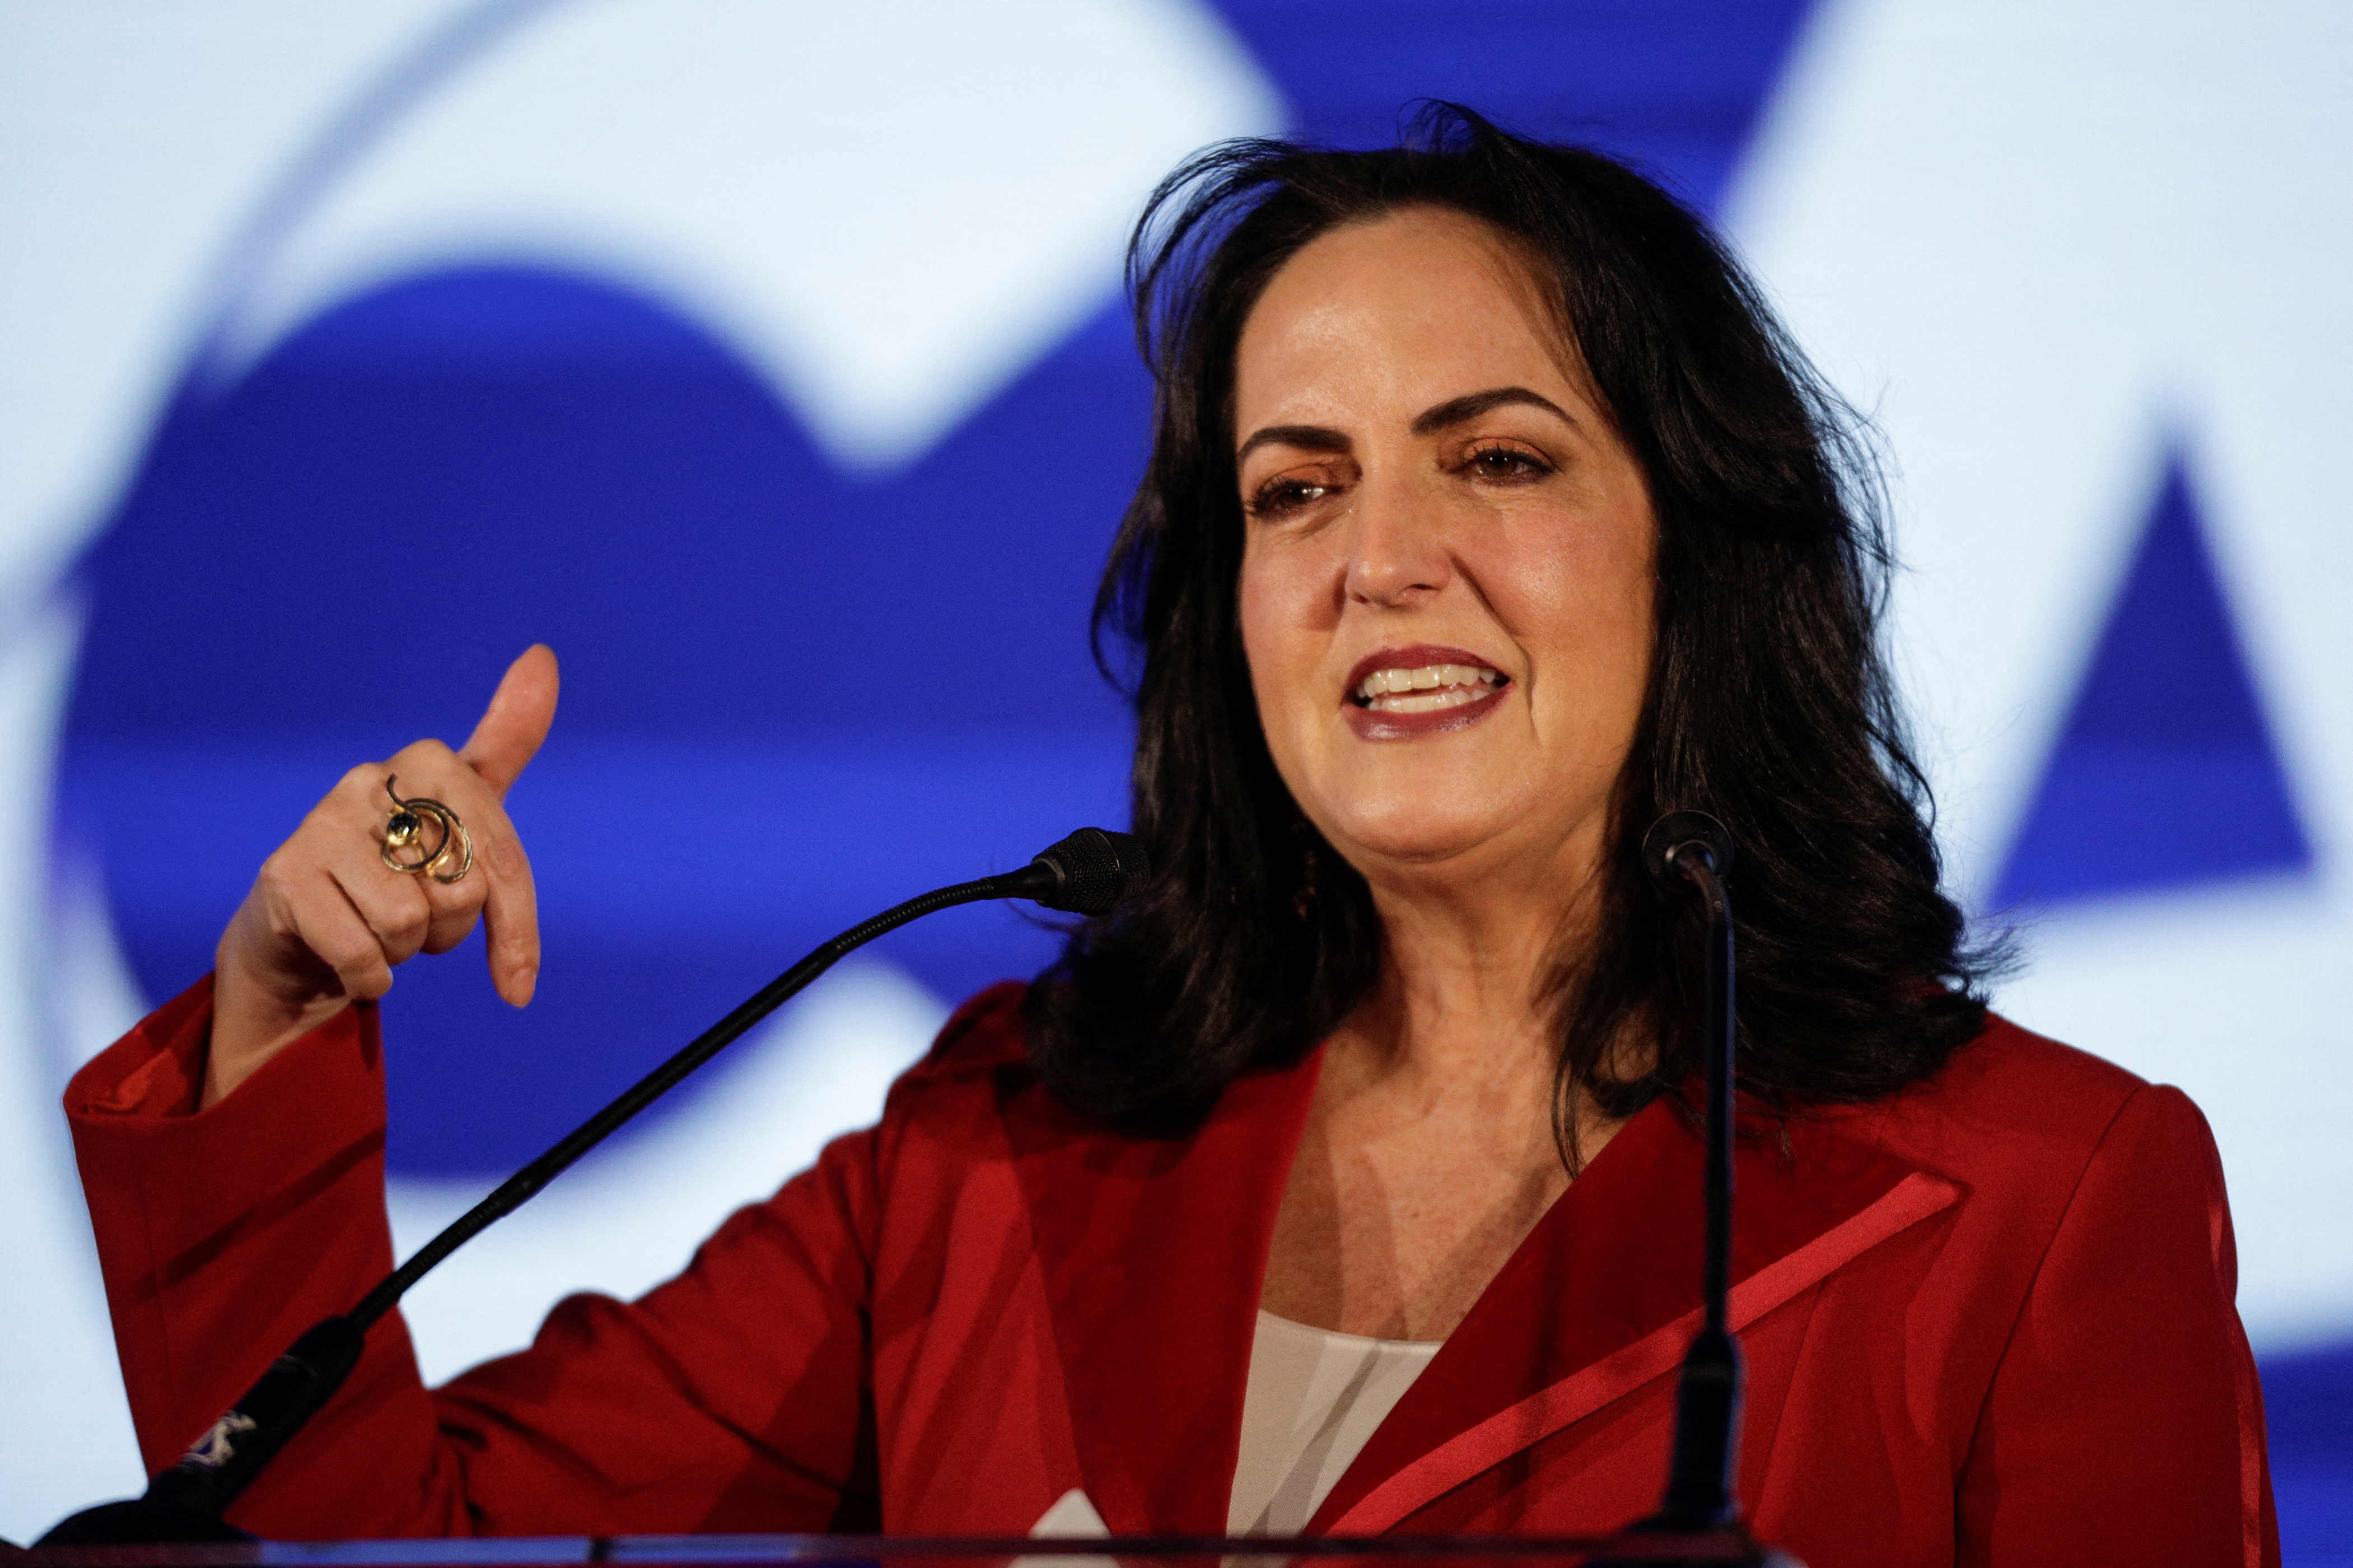 Colombian Senator Maria Fernanda Cabal speaks during the Conservative Political Action Conference (CPAC) in a hotel in Mexico City, Mexico November 19, 2022. REUTERS/Luis Cortes